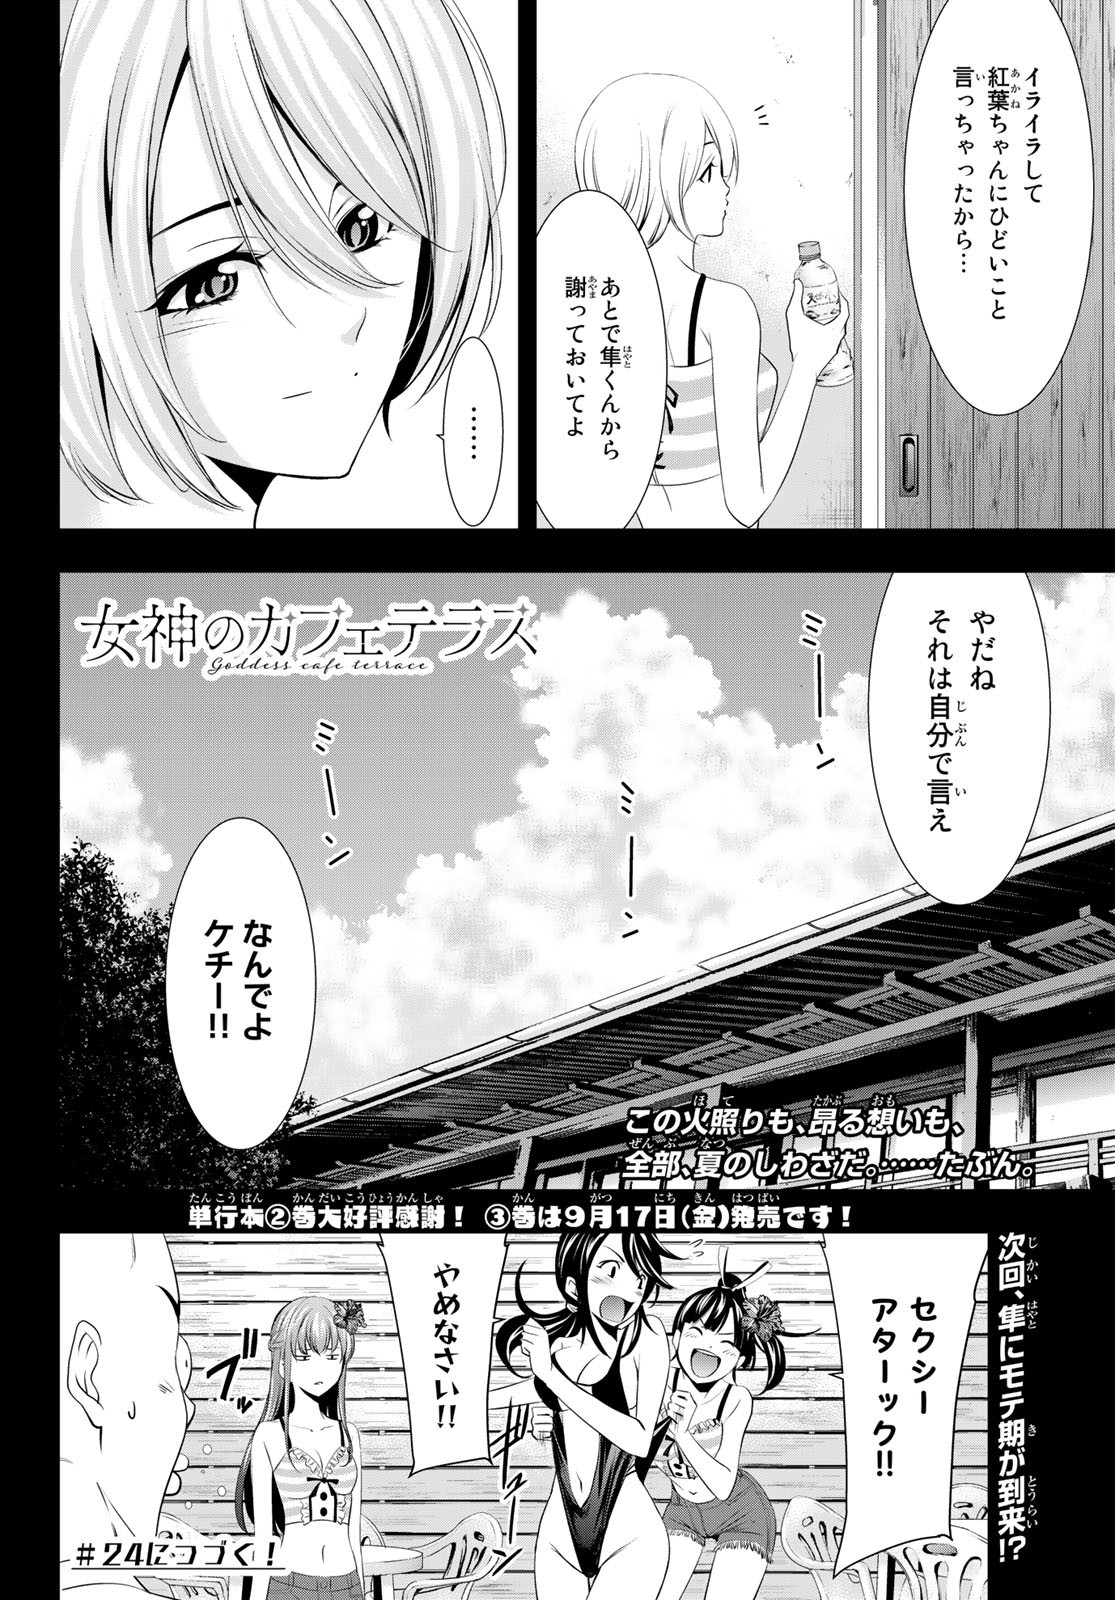 Megami no Cafe Terace - Chapter 23 - Page 18